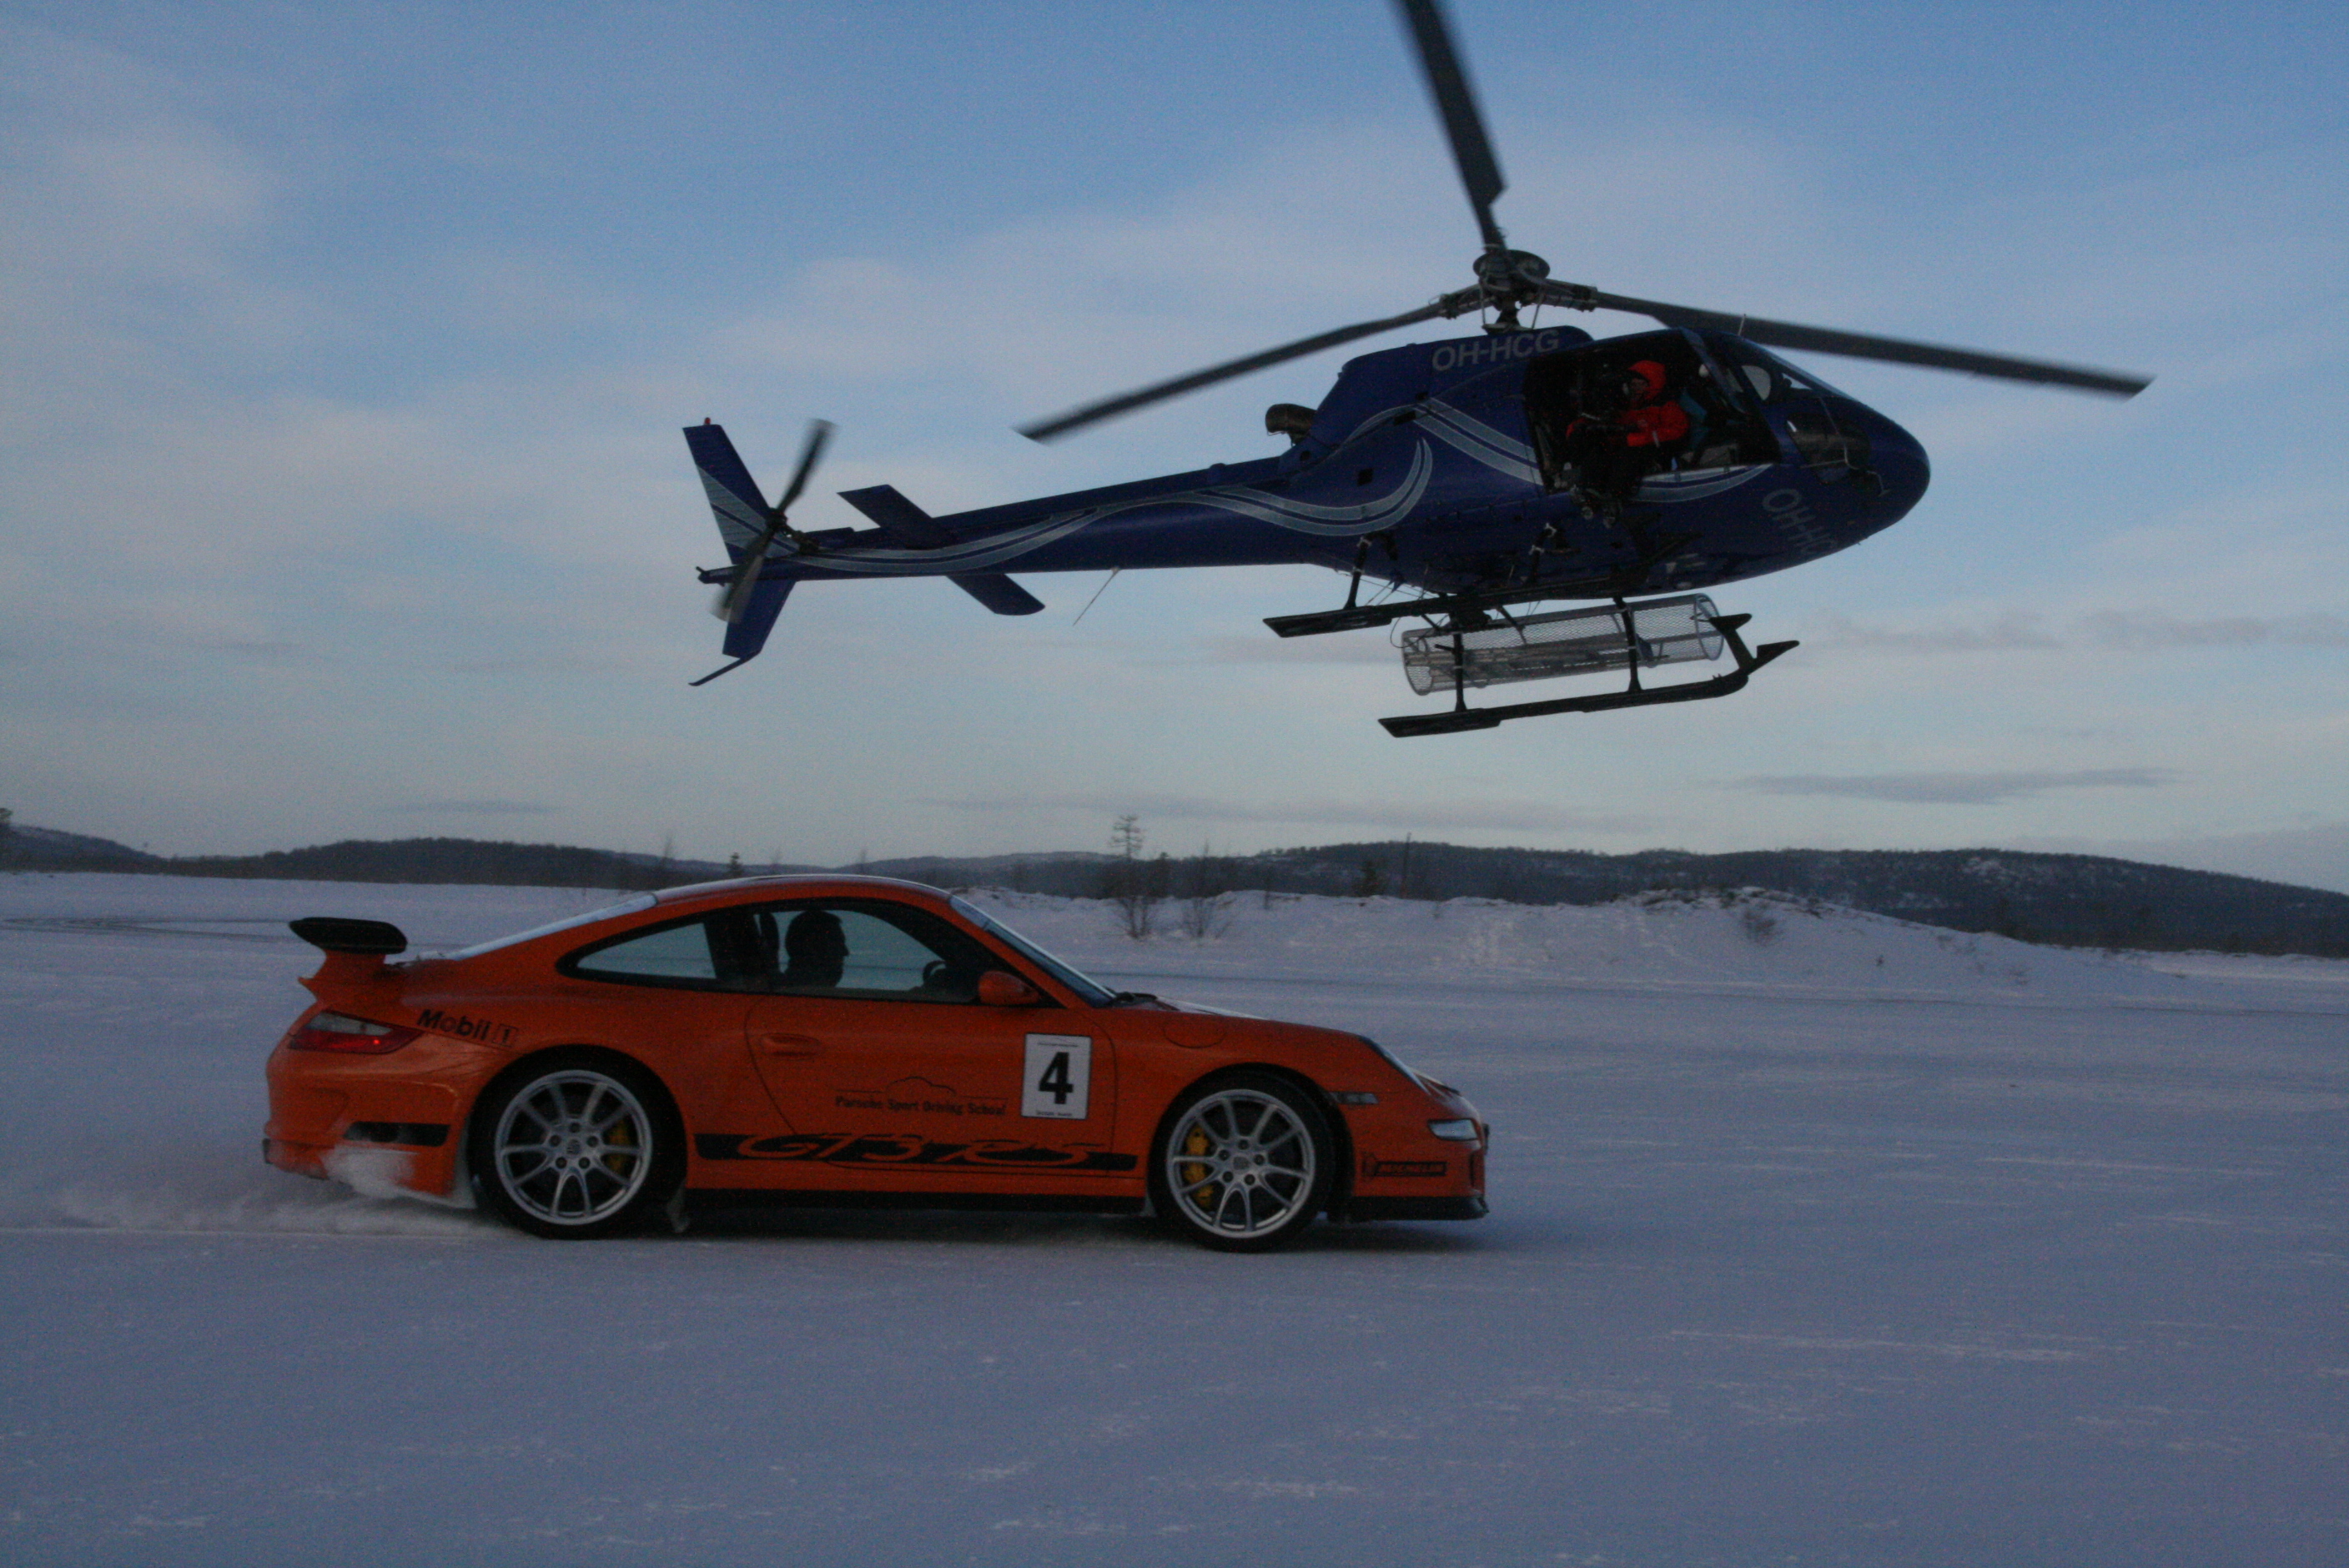 Shooting Porsche in Finland on an ice skid pan.